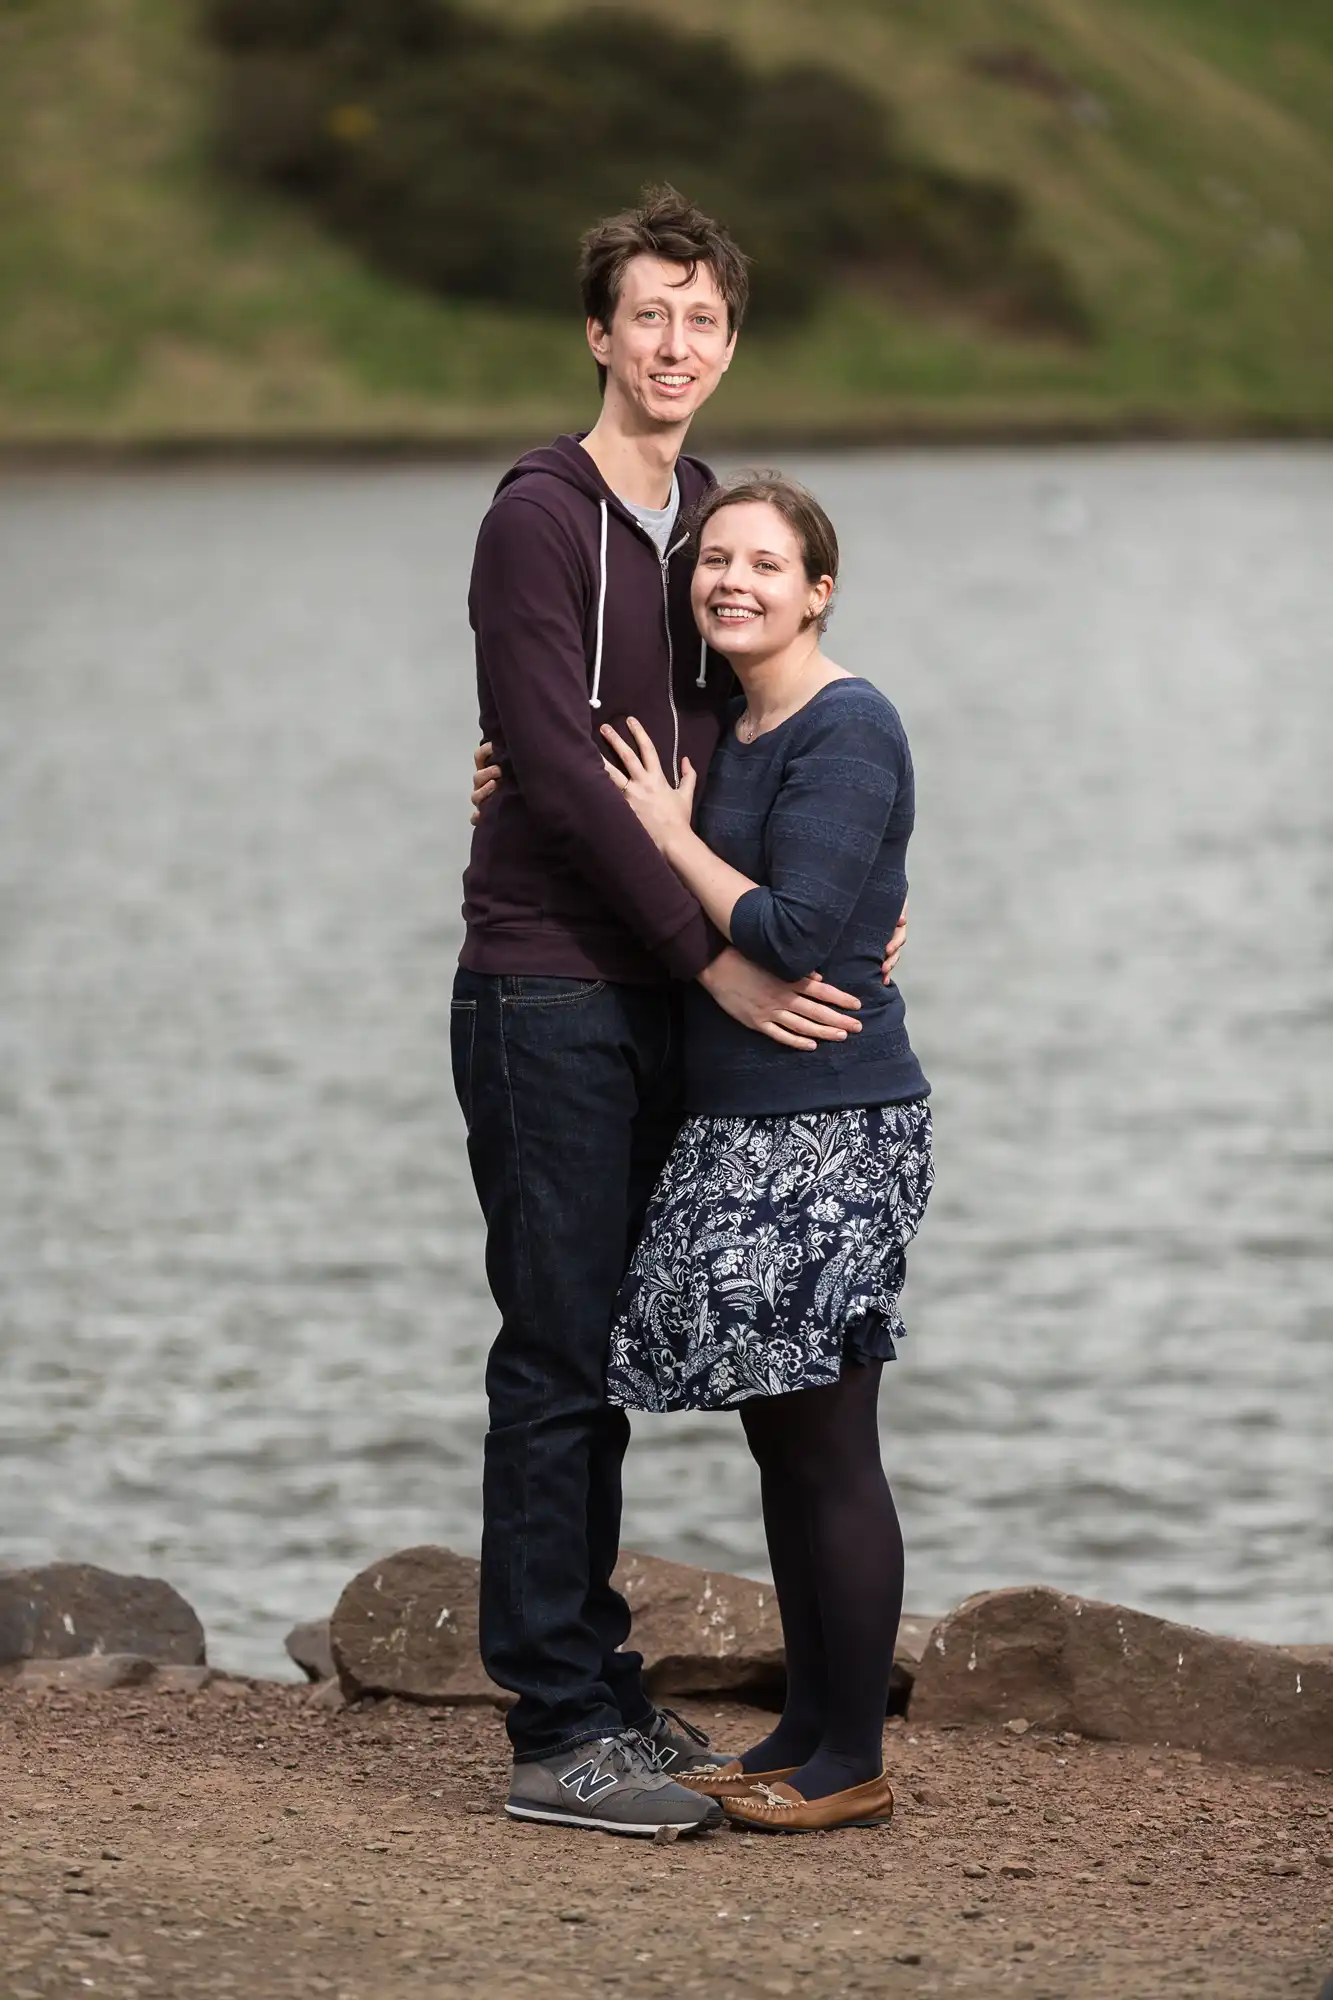 A couple embracing and smiling by a lakeside, with a hill in the background. the man is wearing a purple hoodie and jeans, and the woman a blue top with a floral skirt.